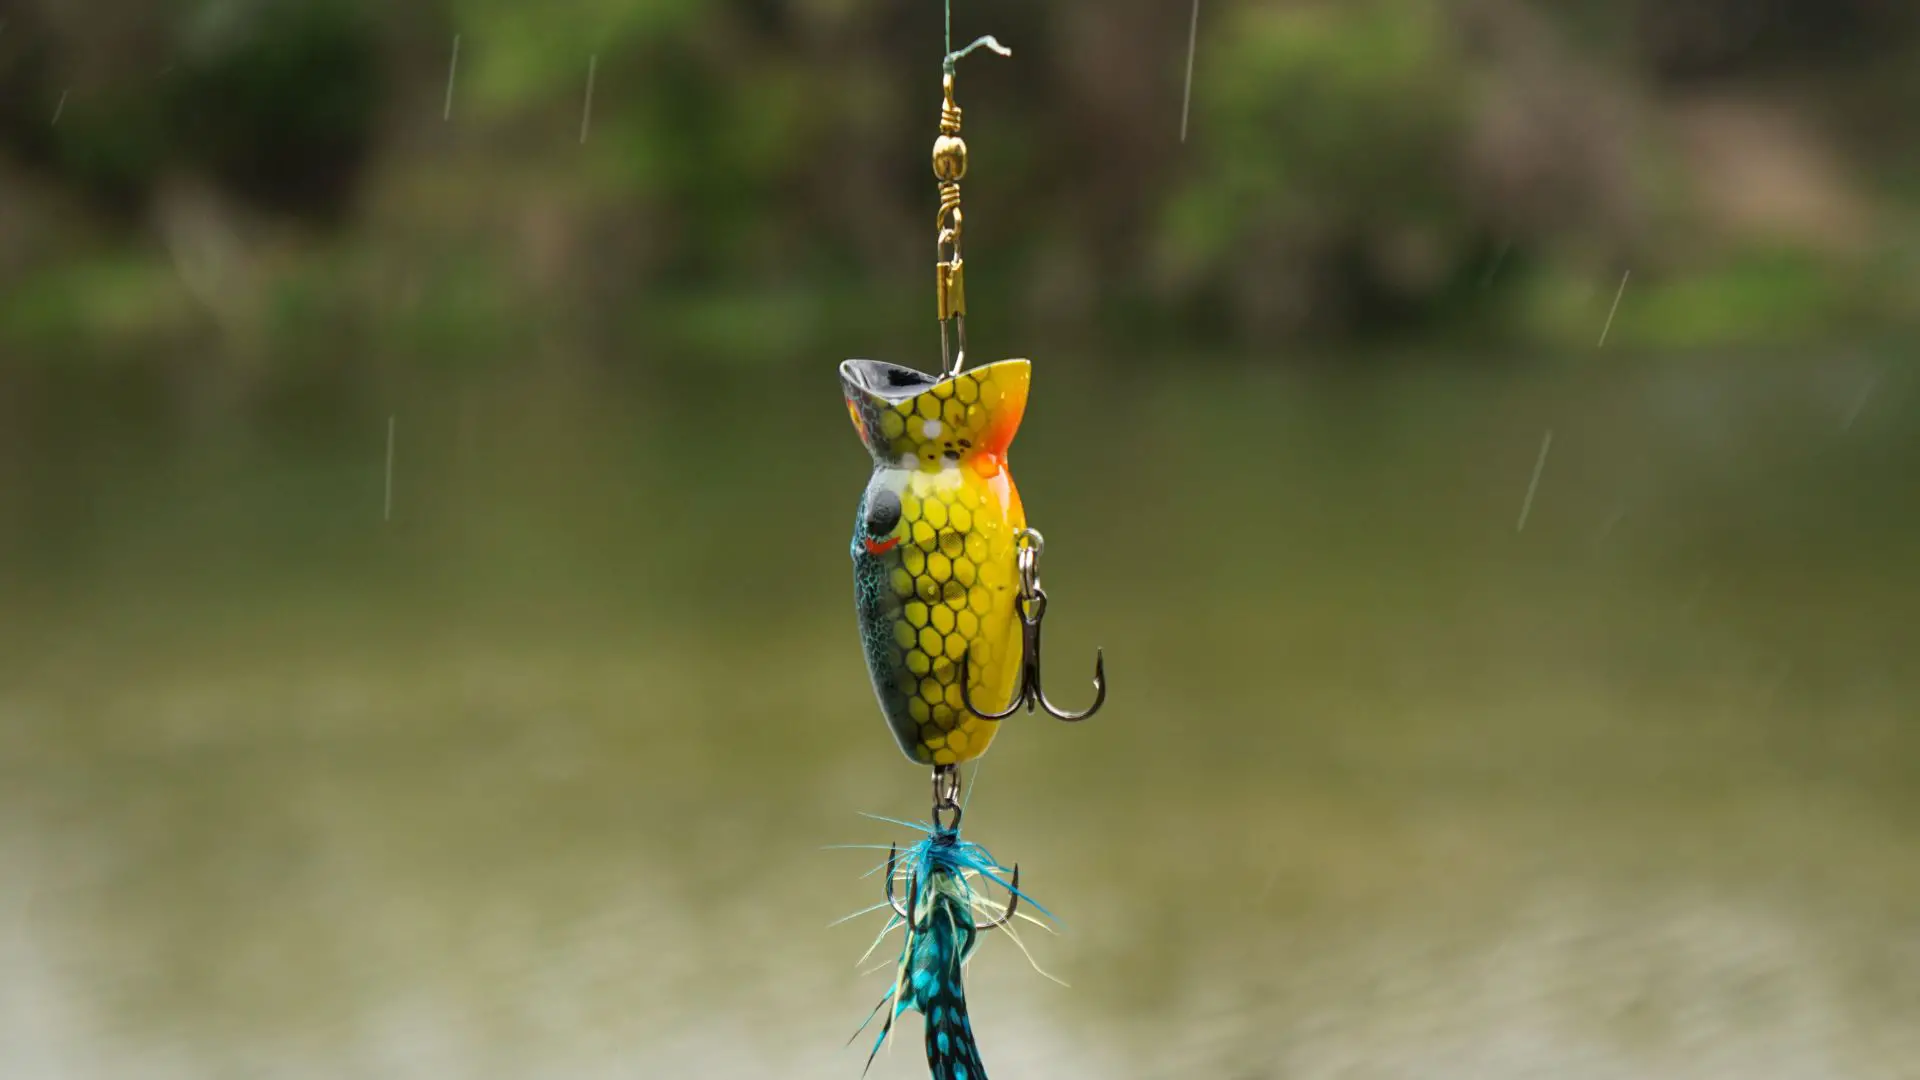 A colorful fishing lure